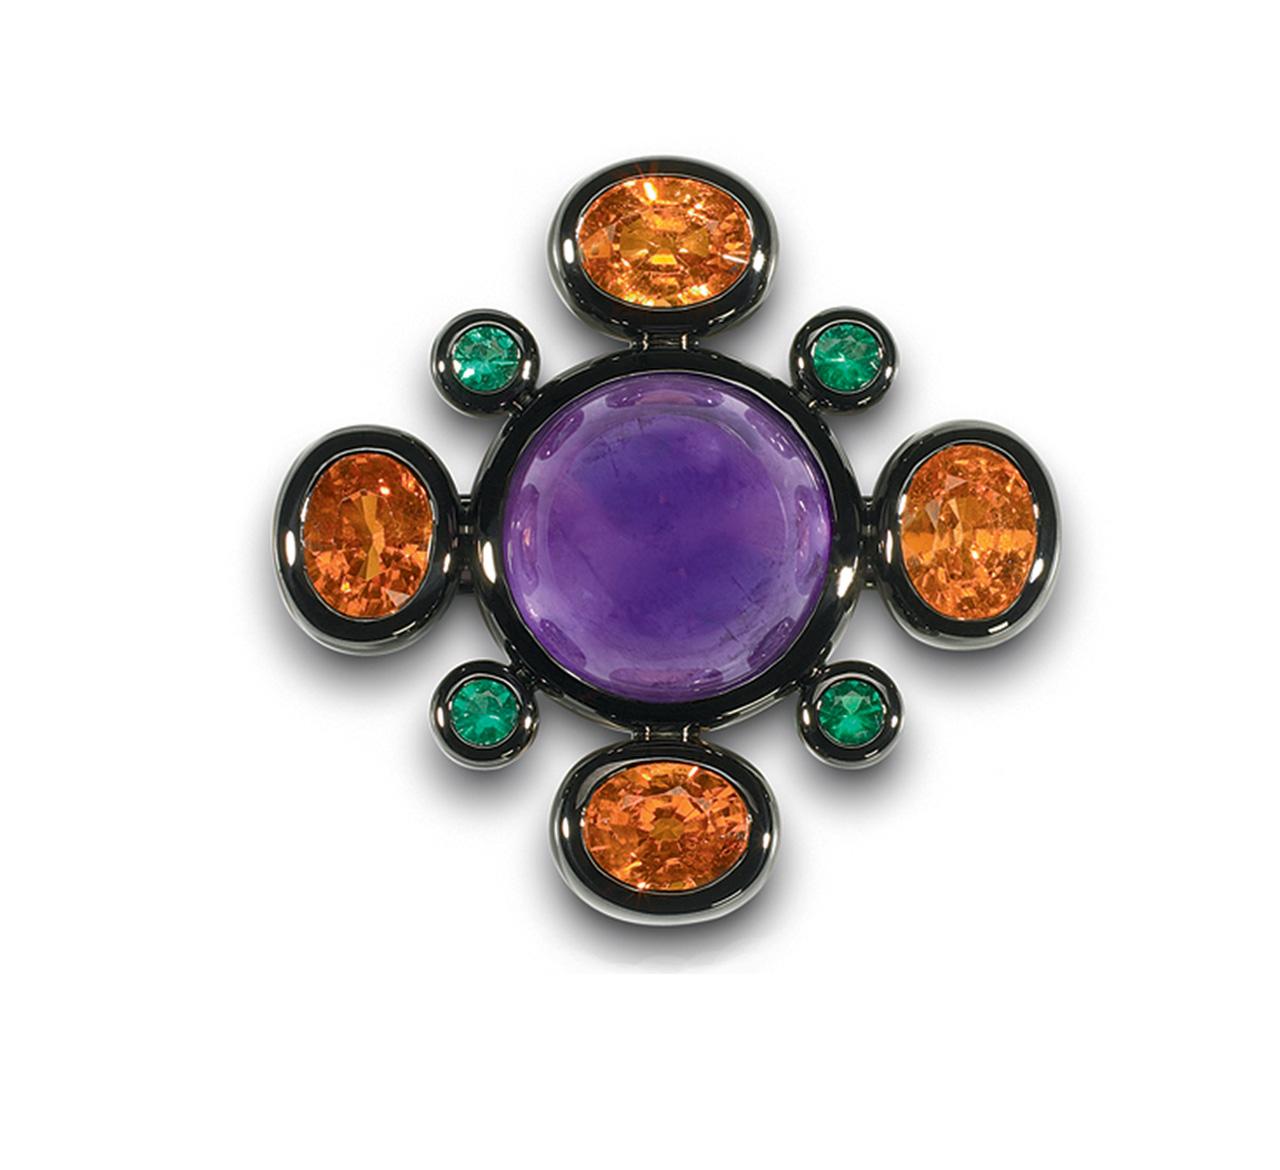 Stunning Colleen B. Rosenblat Brooch with one large 26.89 Carat Amethyst and 4 Mandarine Garnets 16.25 Carat and 4 Emeralds 0.66 Carat each.
This Brooch is made of 18 Carat blackened white gold and can also be worn as a Pendant on a chain.